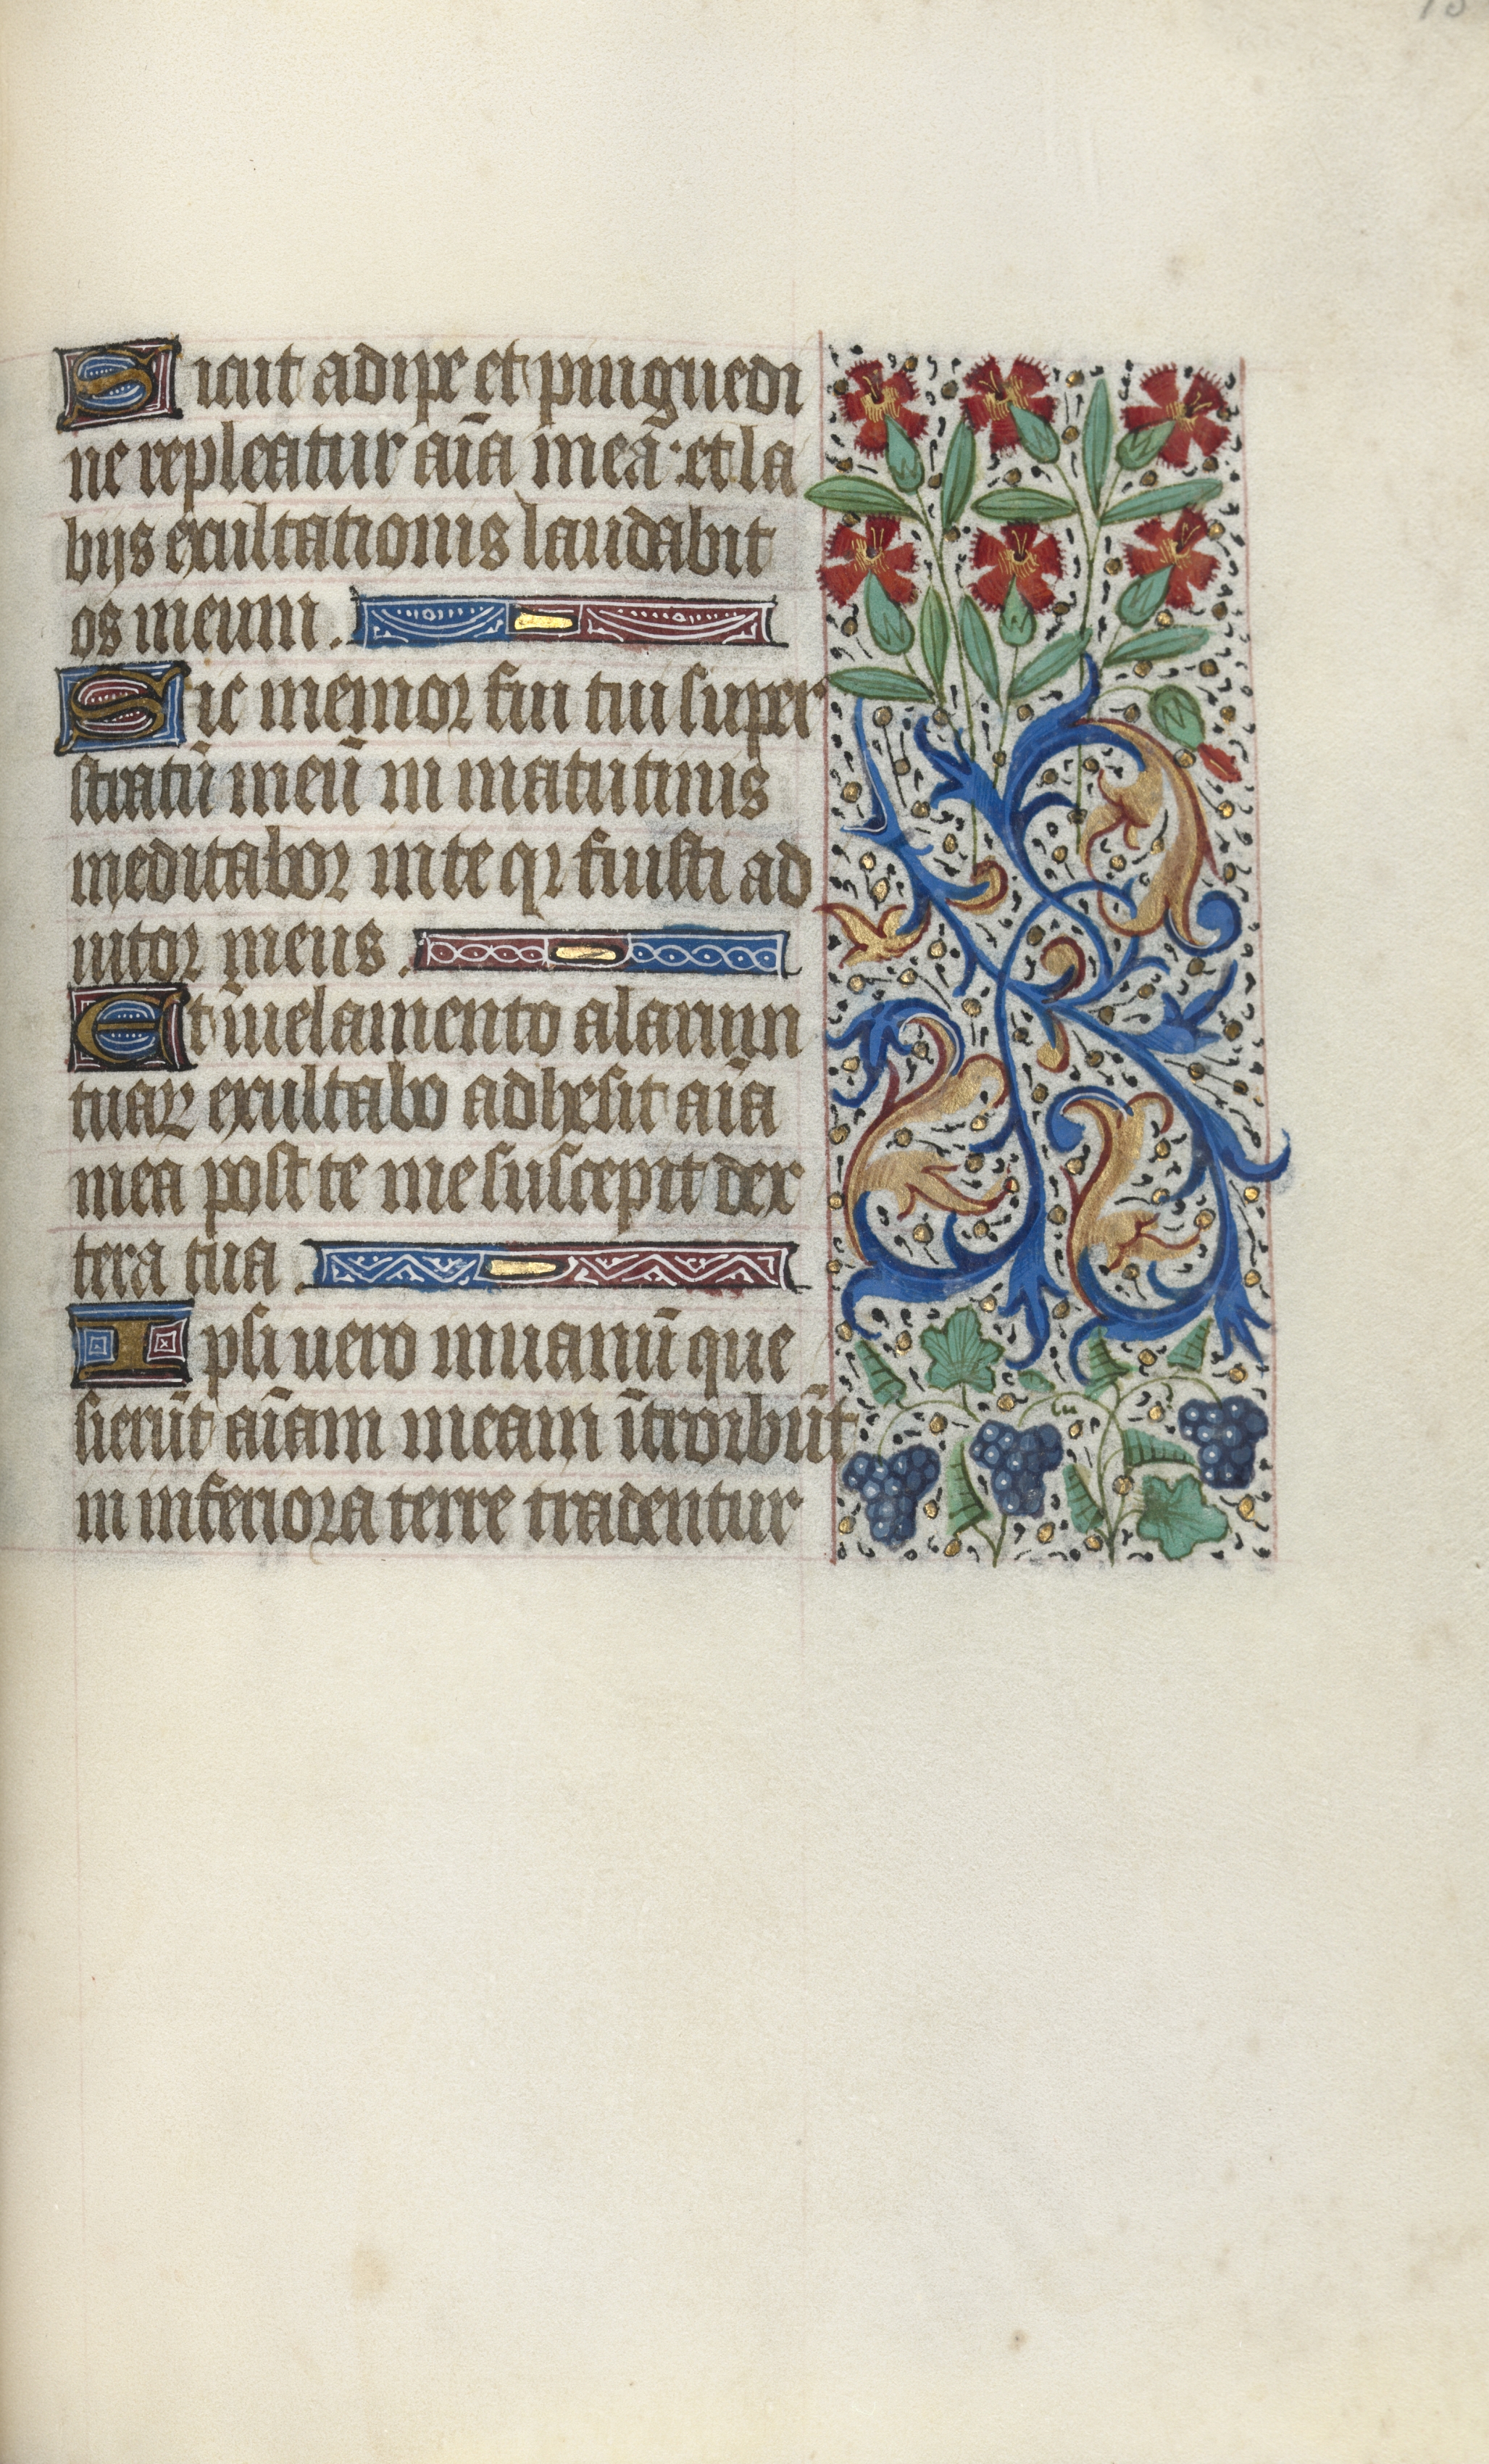 Book of Hours (Use of Rouen): fol. 138r